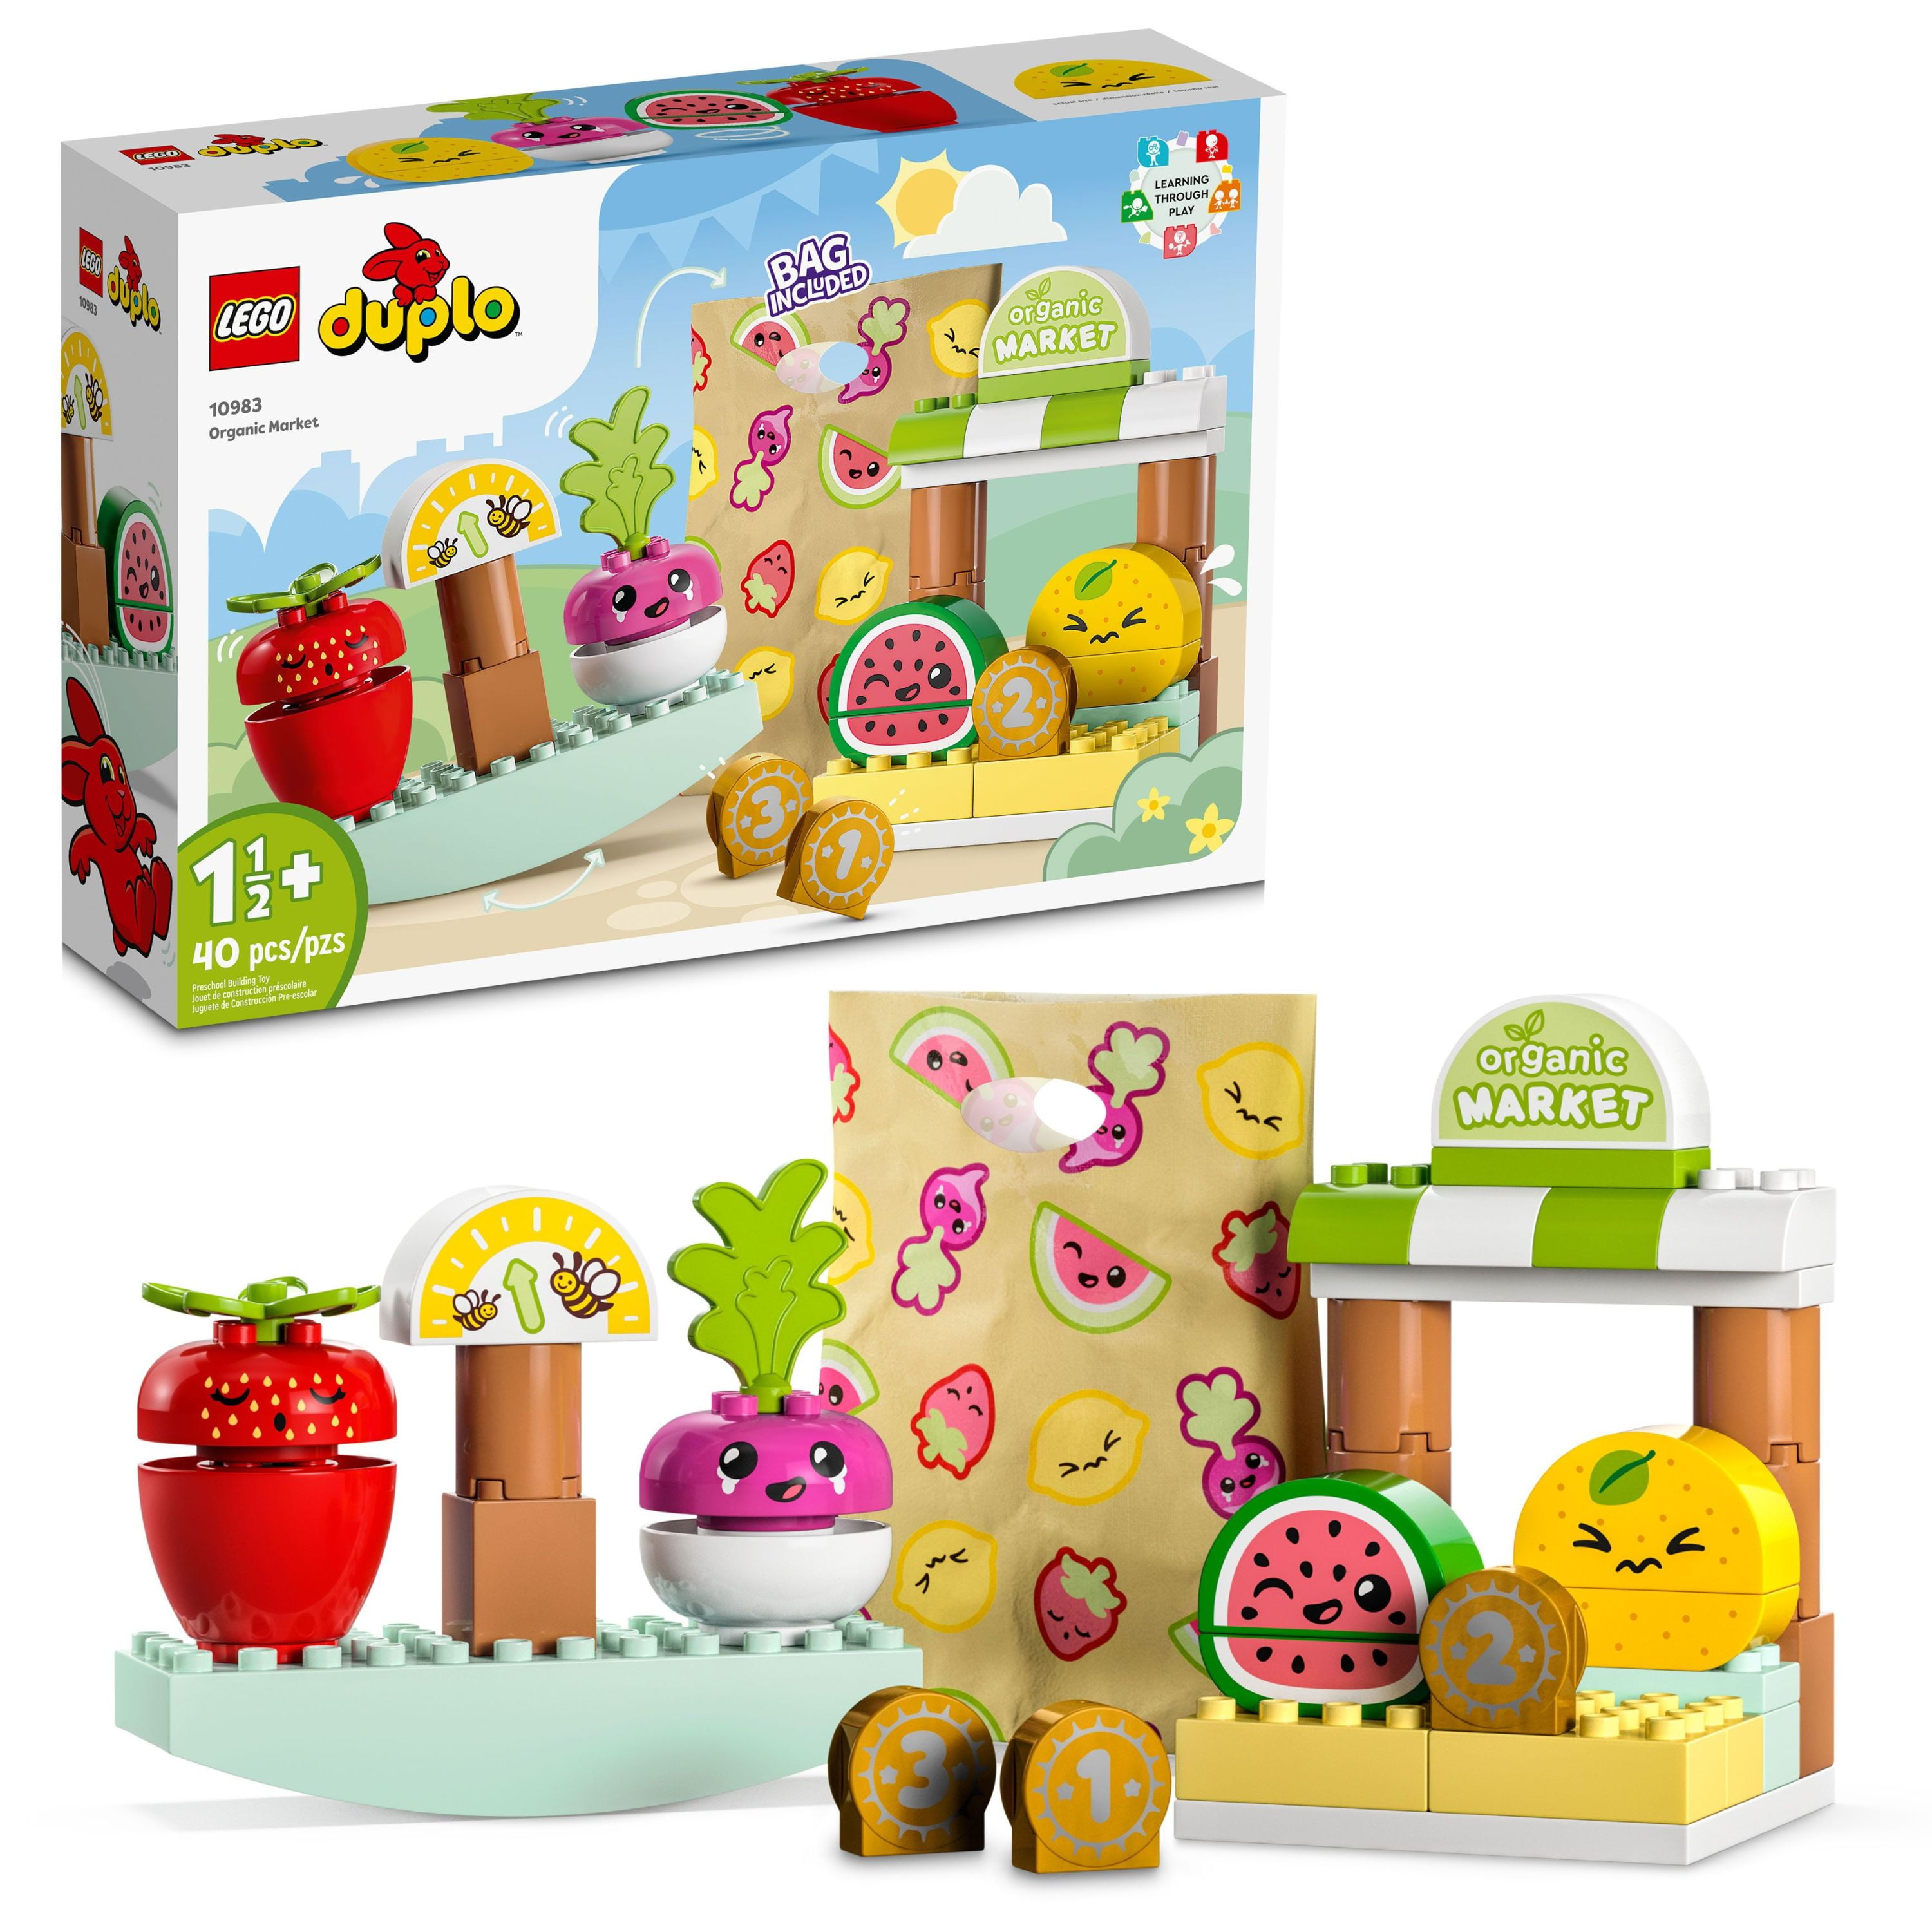 LEGO DUPLO My First Organic Market 10983, Fruit and Vegetables Toy Food Set, Learn Numbers, Educational Toys for Toddlers 18 - 3 Years Old - Walmart.com